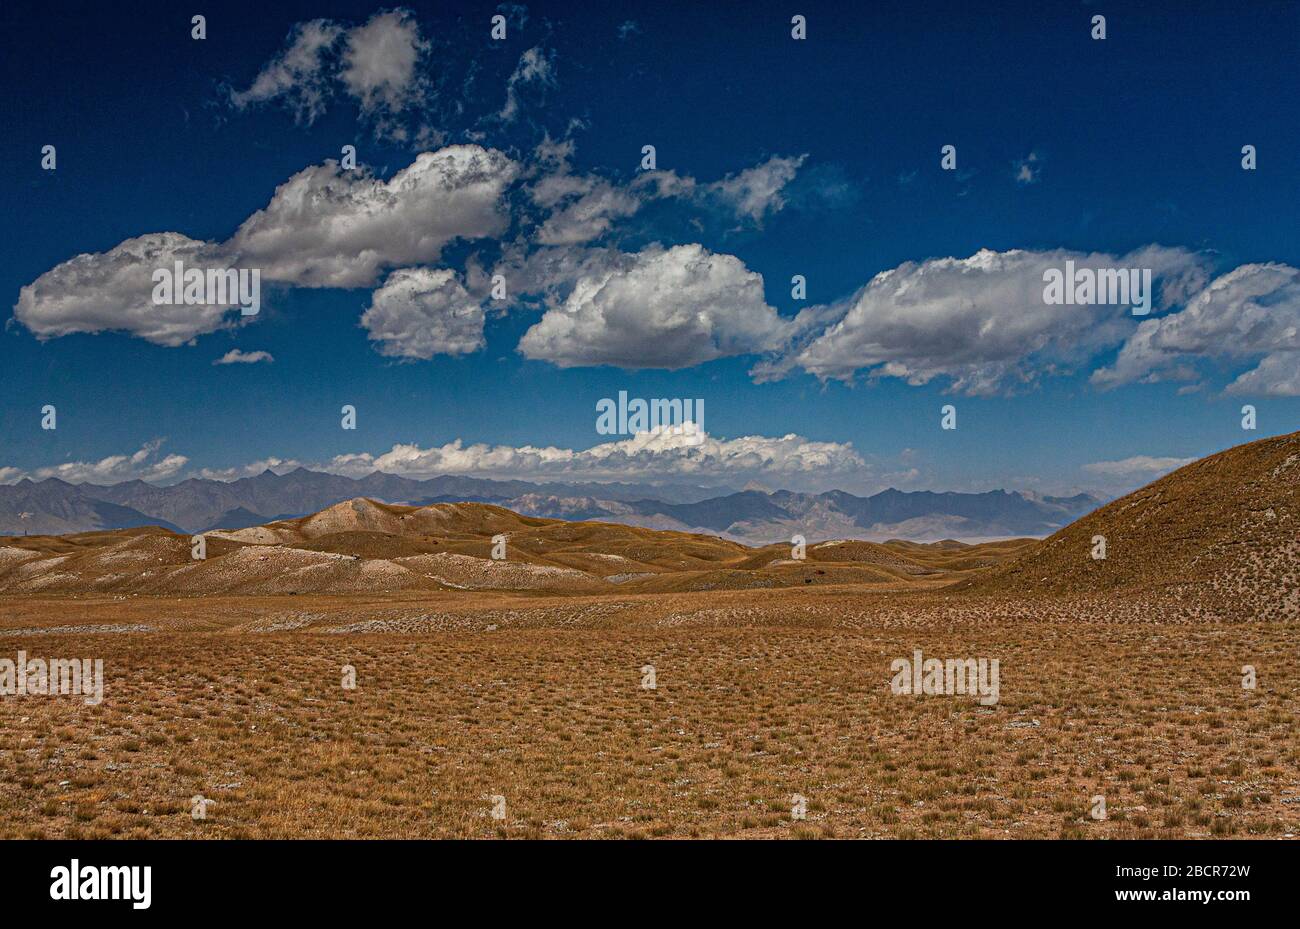 Kyrgyz nature. The Trans-Alay Range. Pamir Mountain System. Cloudy day. Hilly terrain. Stock Photo